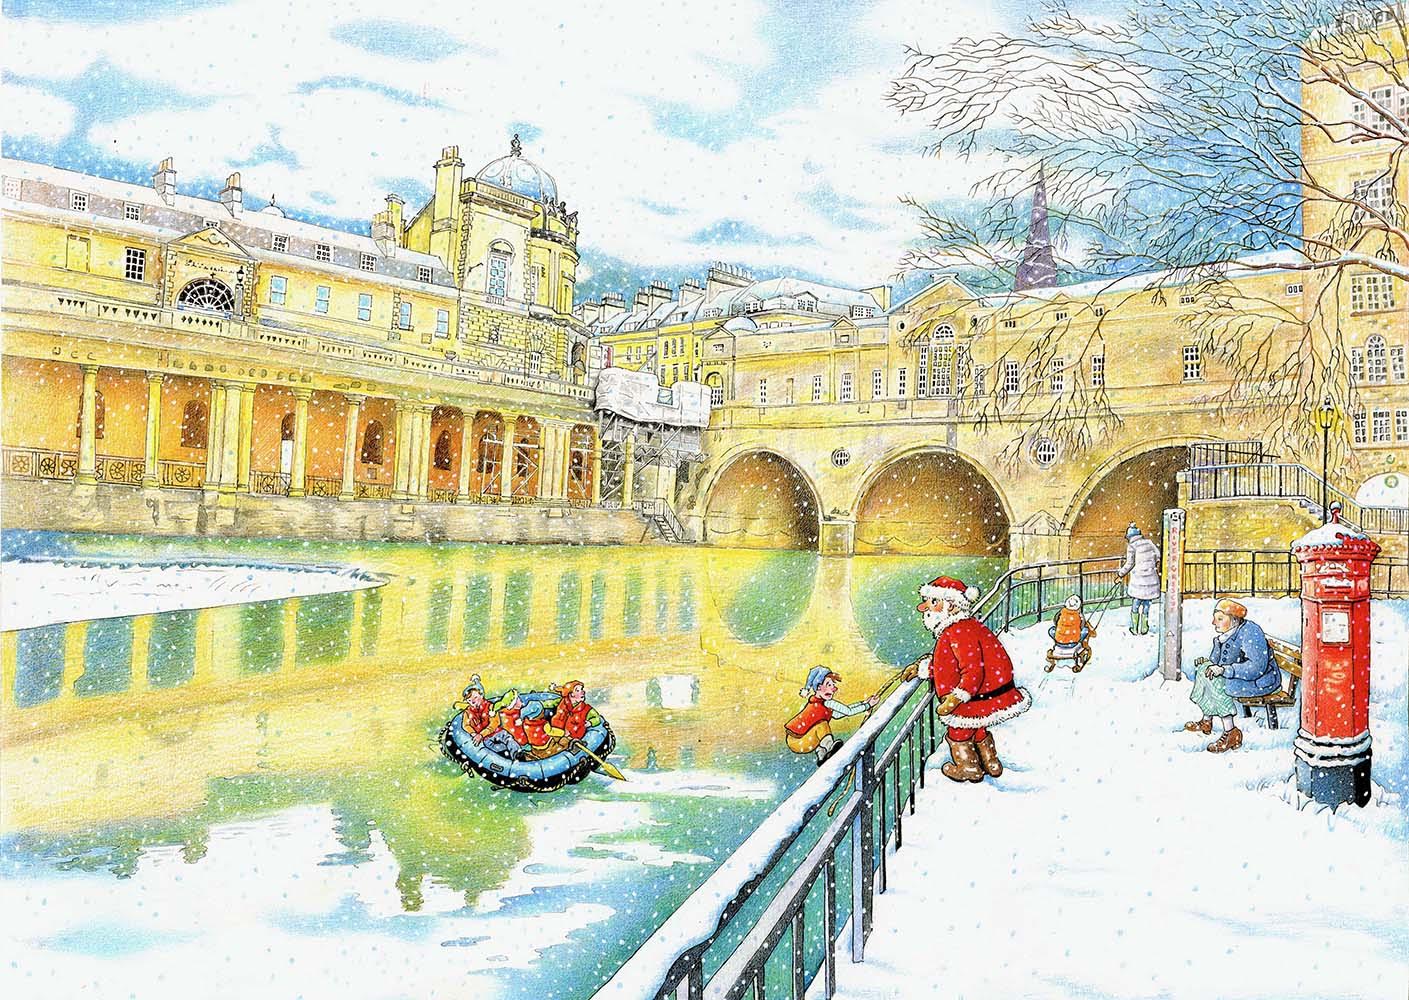 WIDCOMBE CHRISTMAS MARKET in Bath will be held on  Saturday 19 and Sunday 20 November 2022